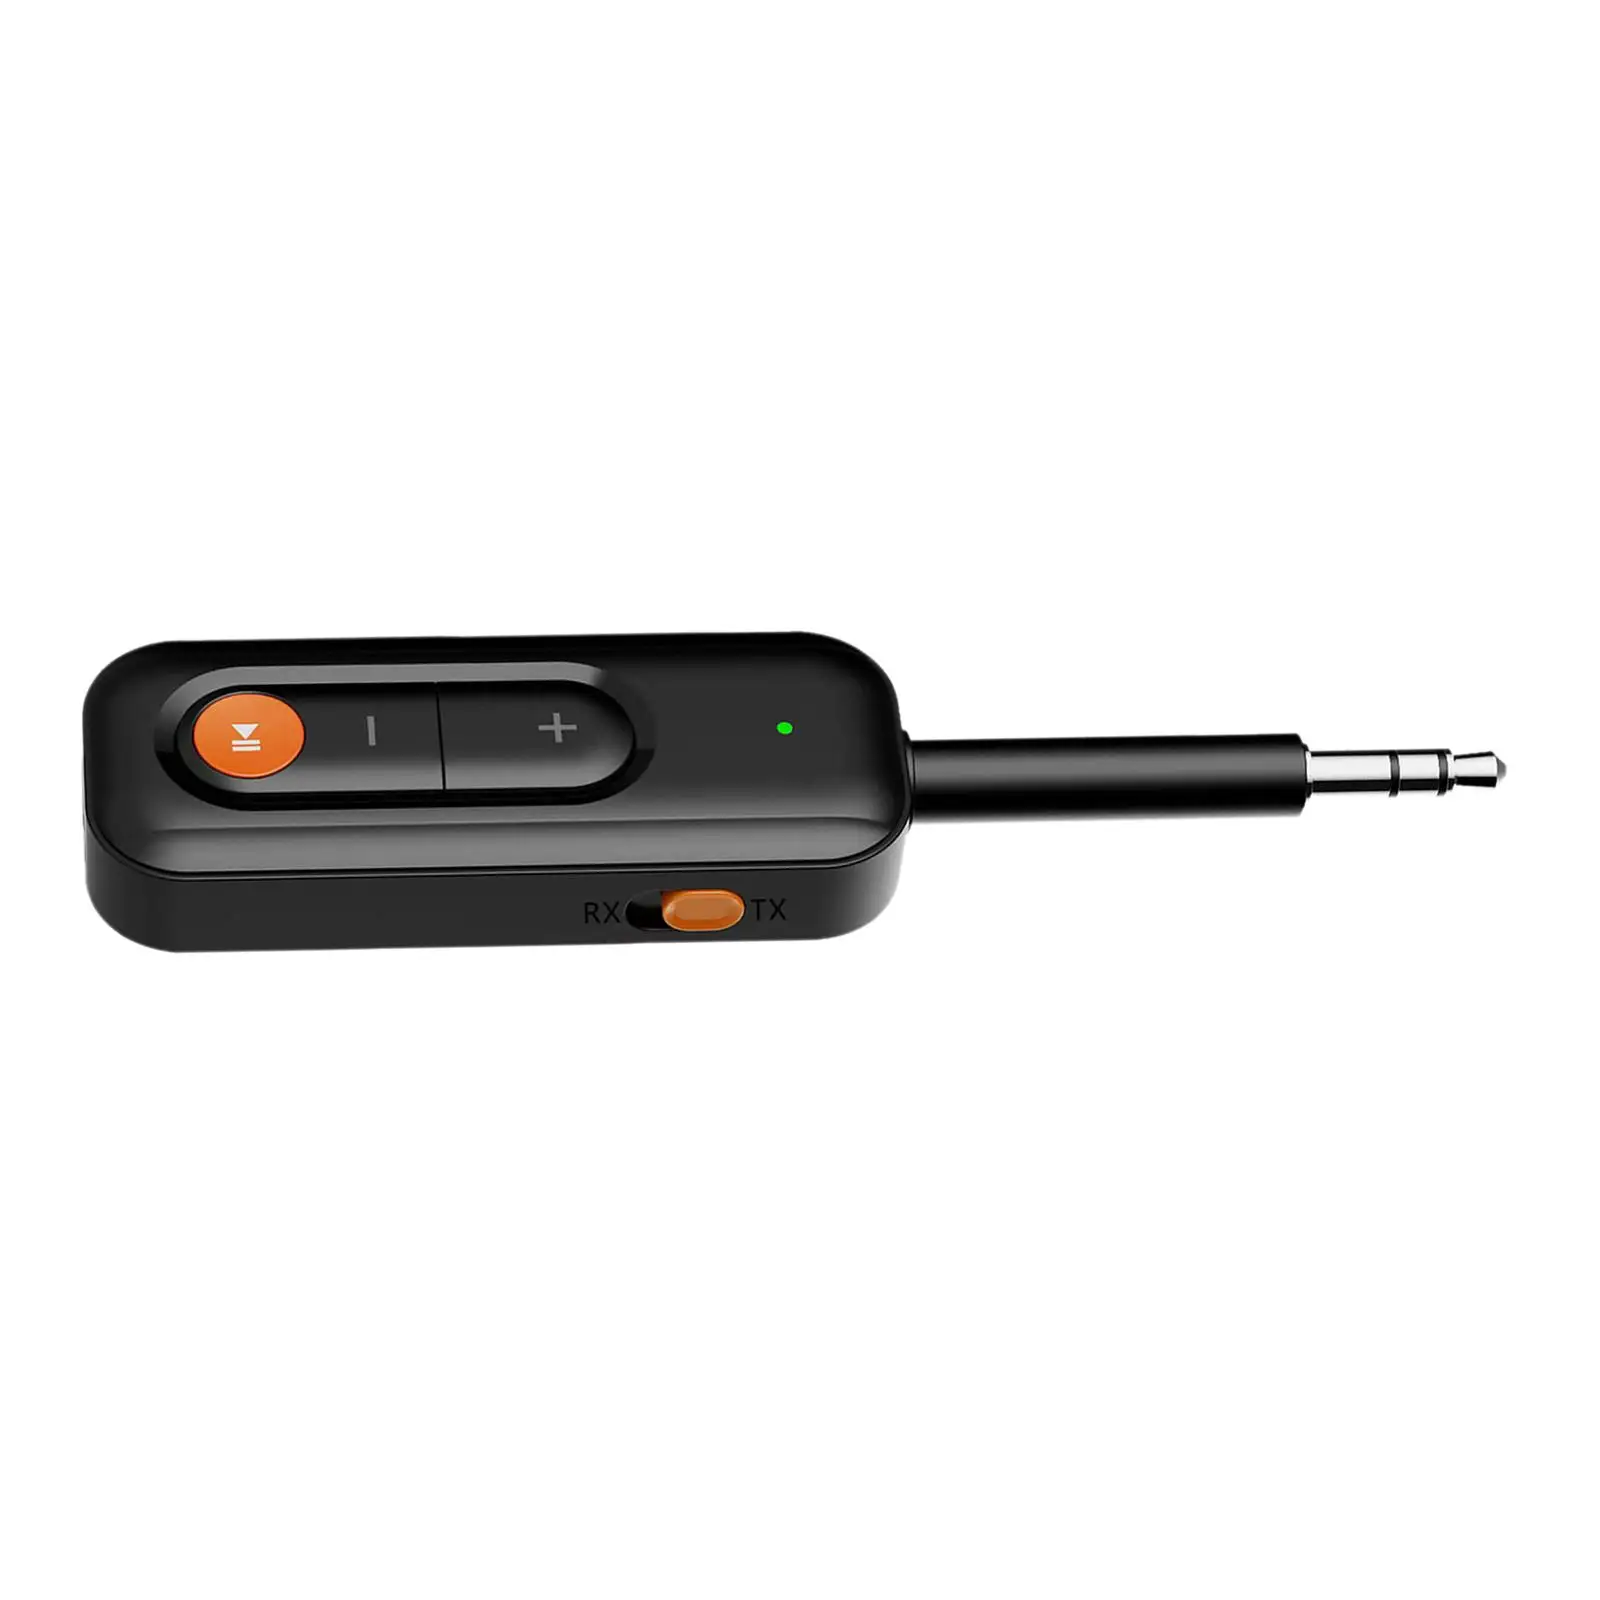 Audio Transmitter and Receiver Transceiver Support Dual Devices Simultaneously Low Latency Car AUX Audio Adapter for Computers